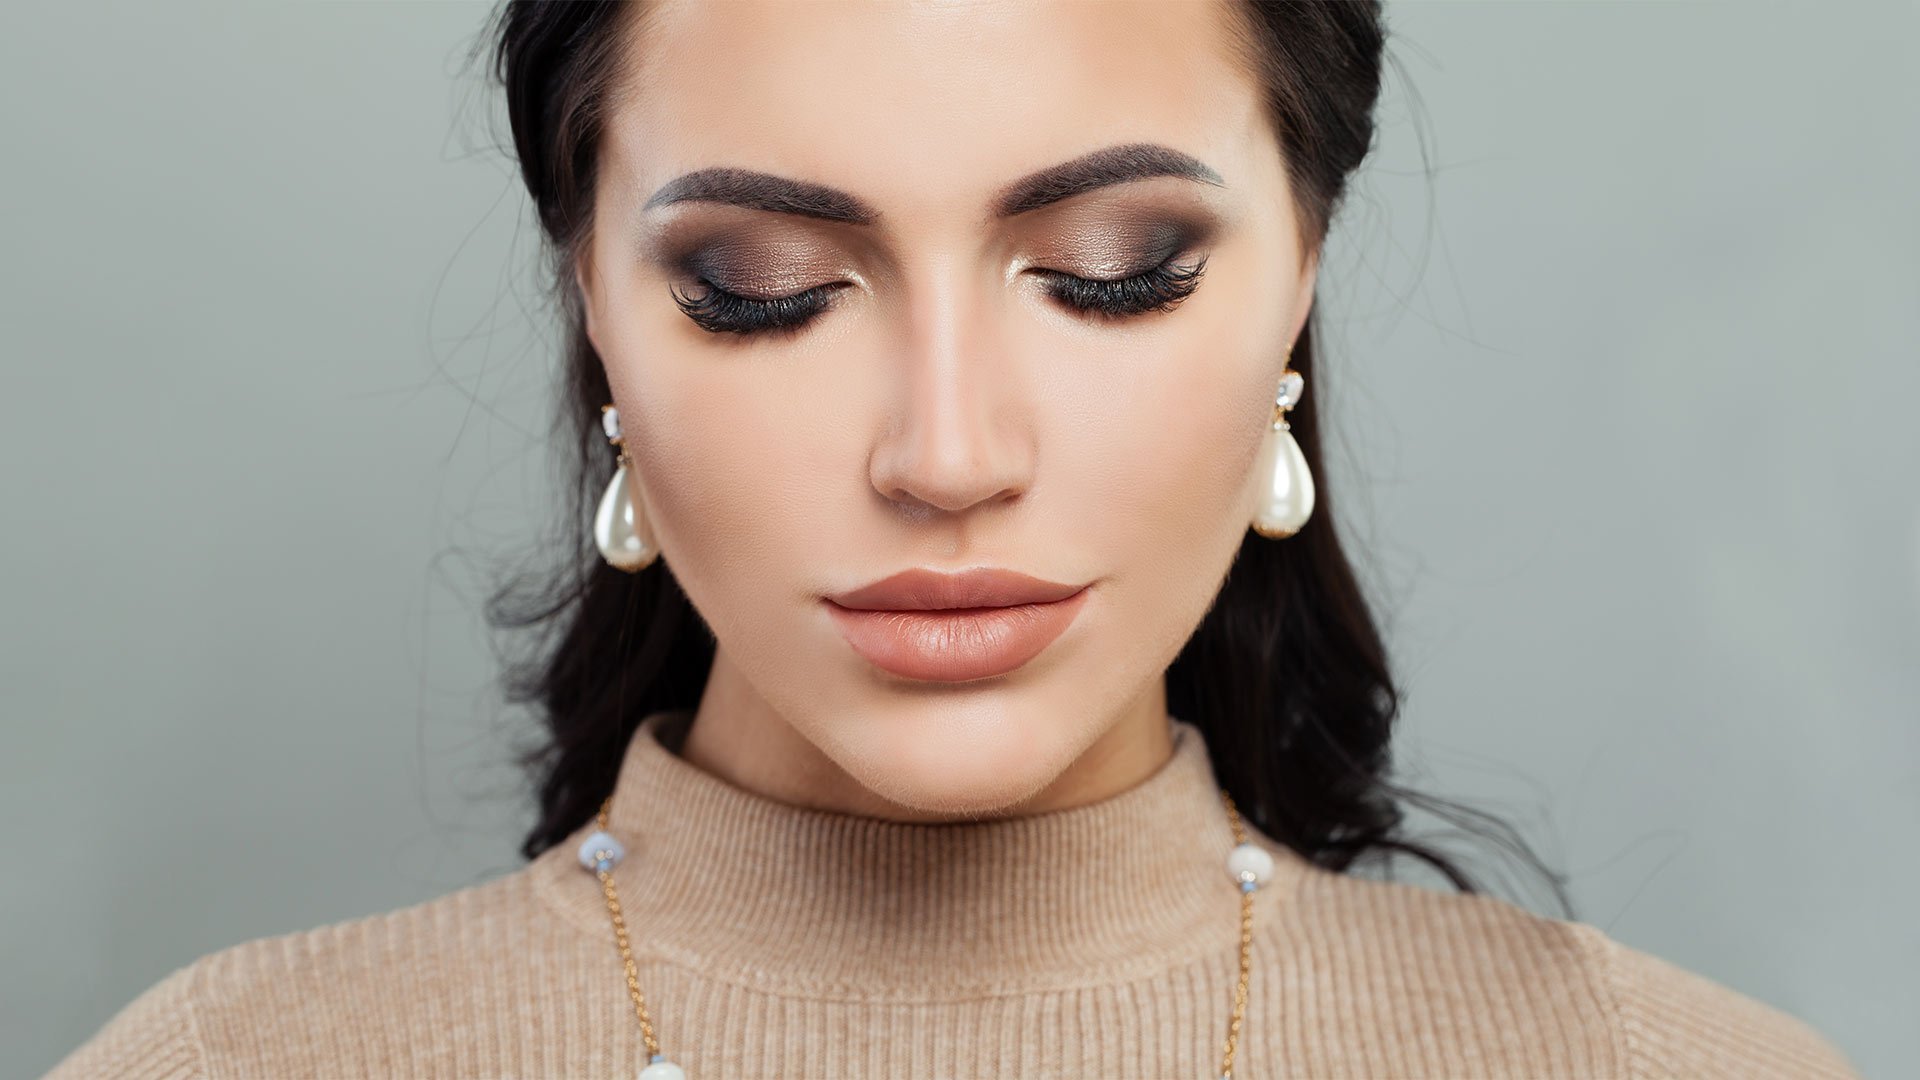 10 Taupe Eyeshadow Looks to Try in 2020 - L'Oréal Paris